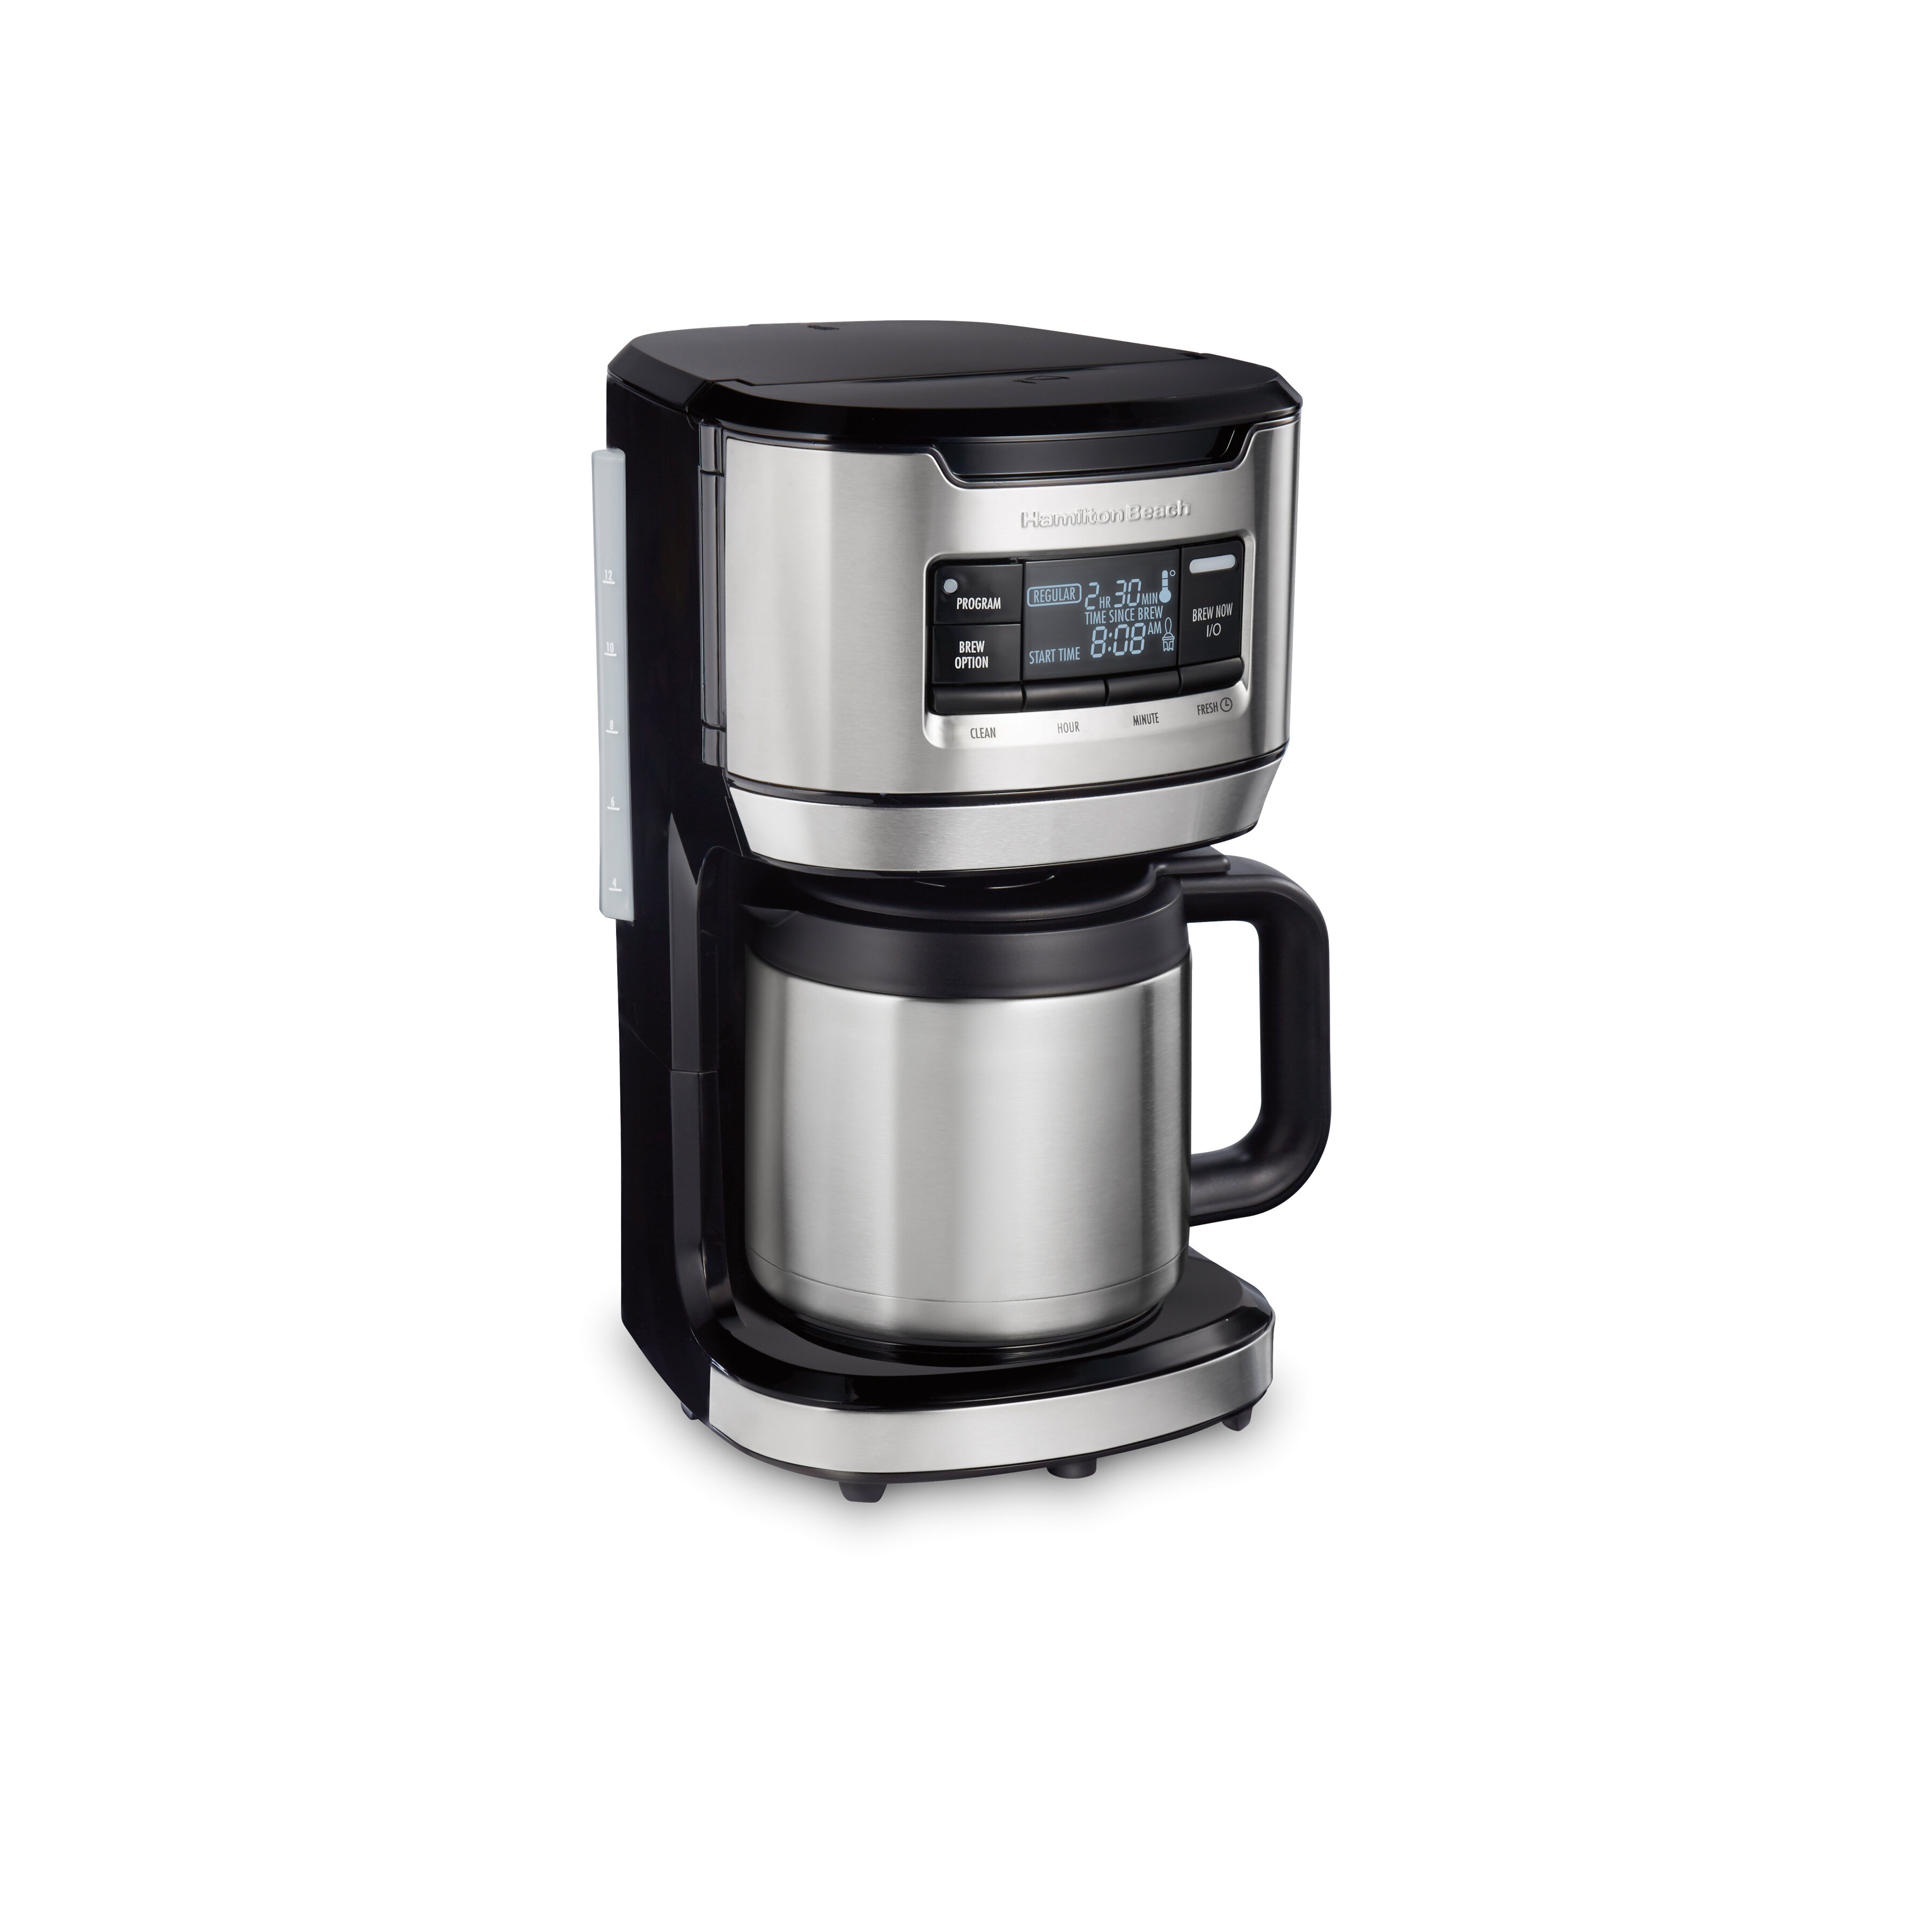 Hamilton Beach® FrontFill 12 Cup Programmable Coffee Maker with